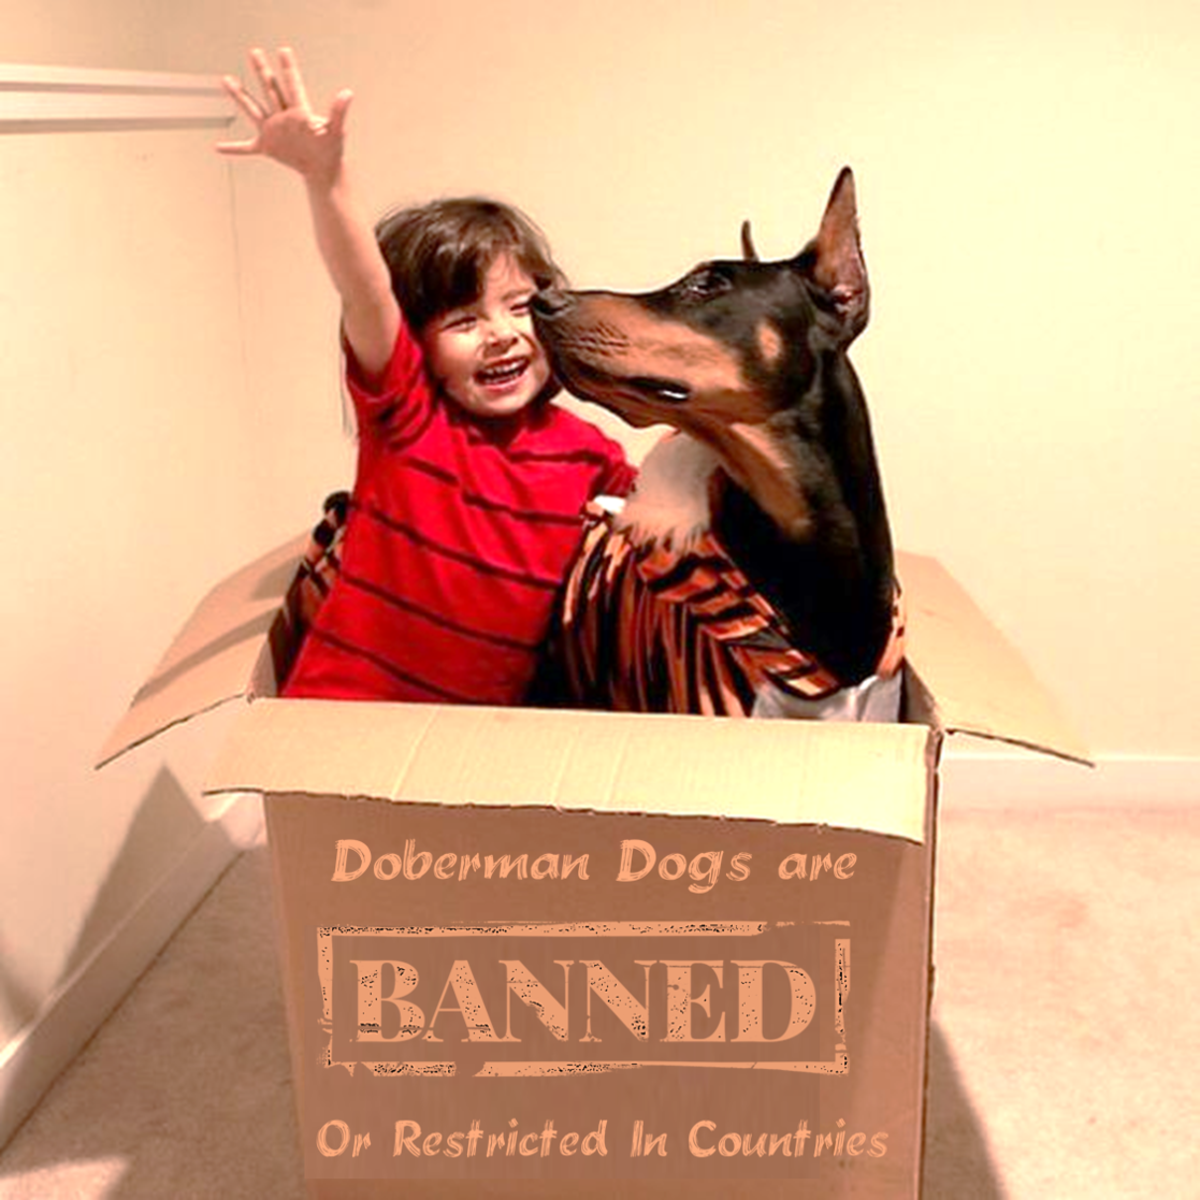 11 Countries Where Doberman Dog Breed is Banned Or Restricted